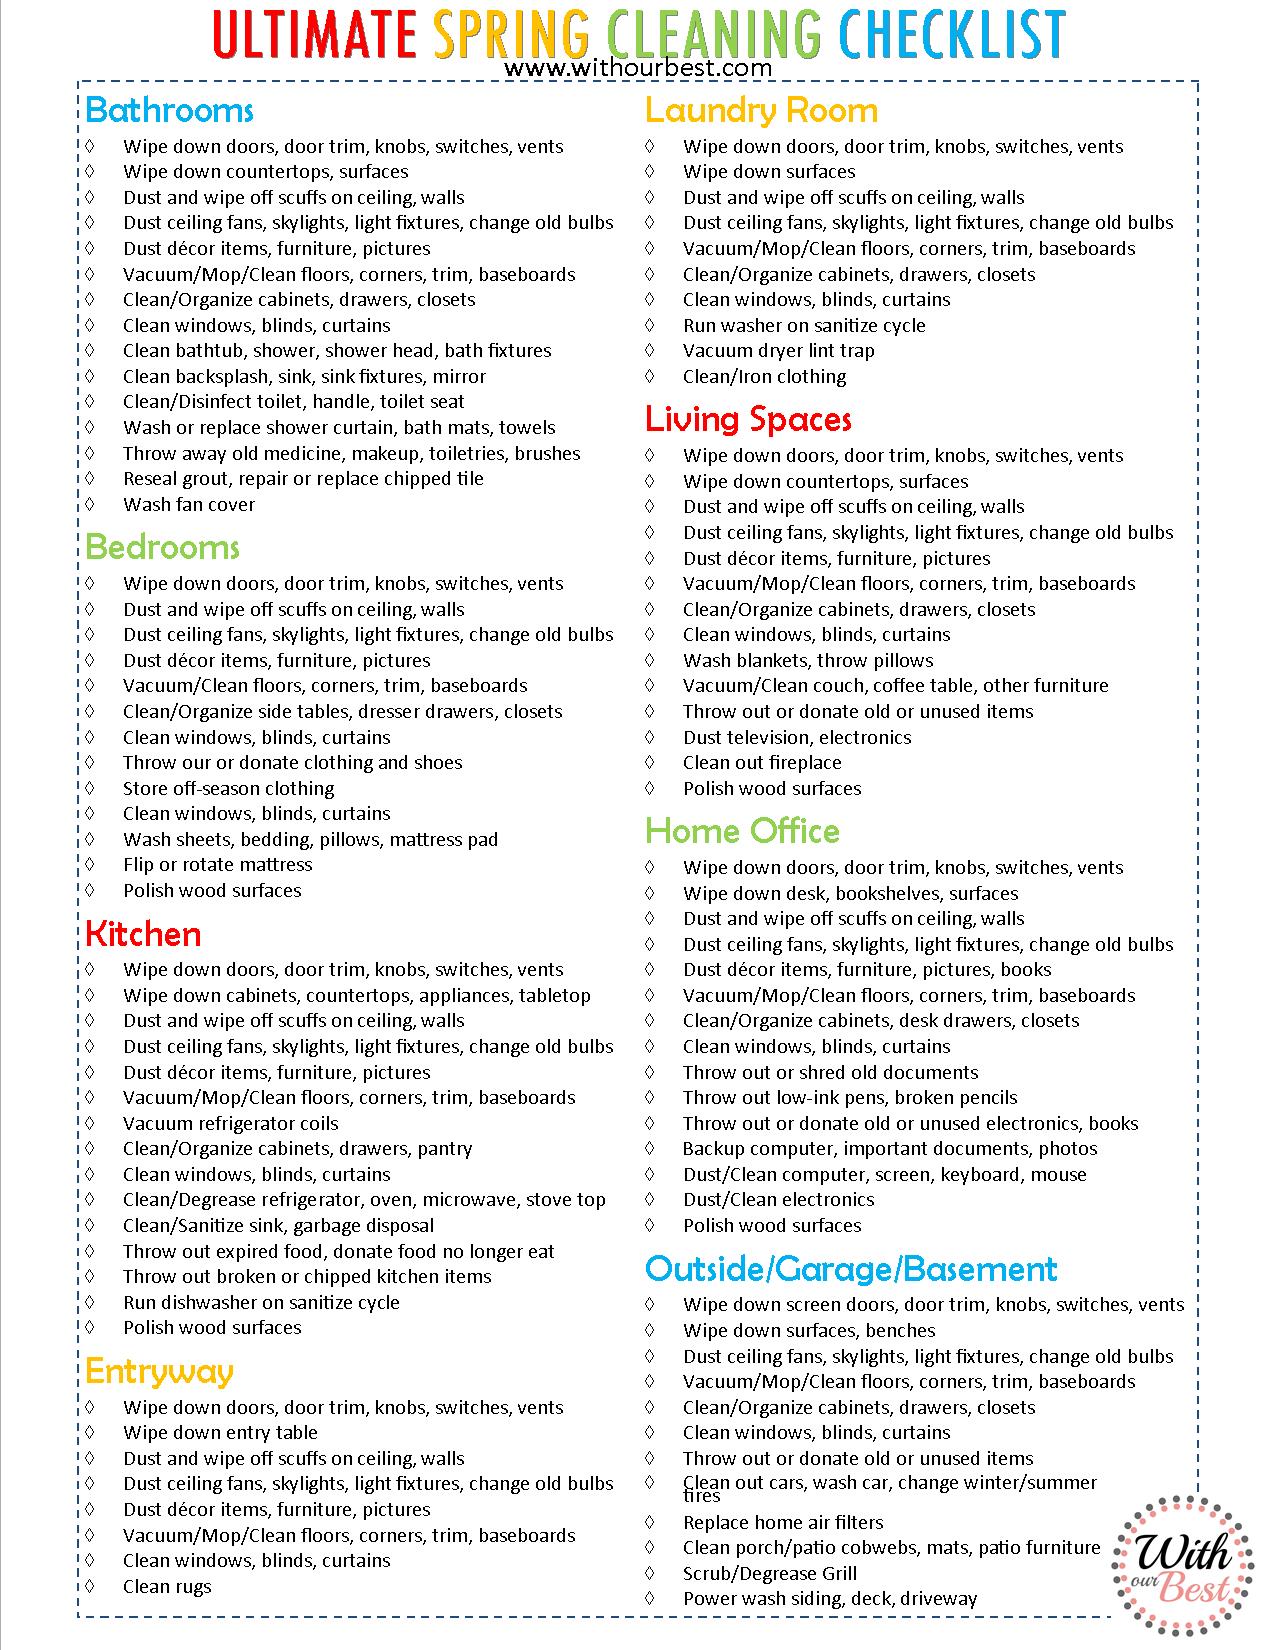 https://www.withourbest.com/wp-content/uploads/2016/04/Spring-Cleaning-Checklist.jpg